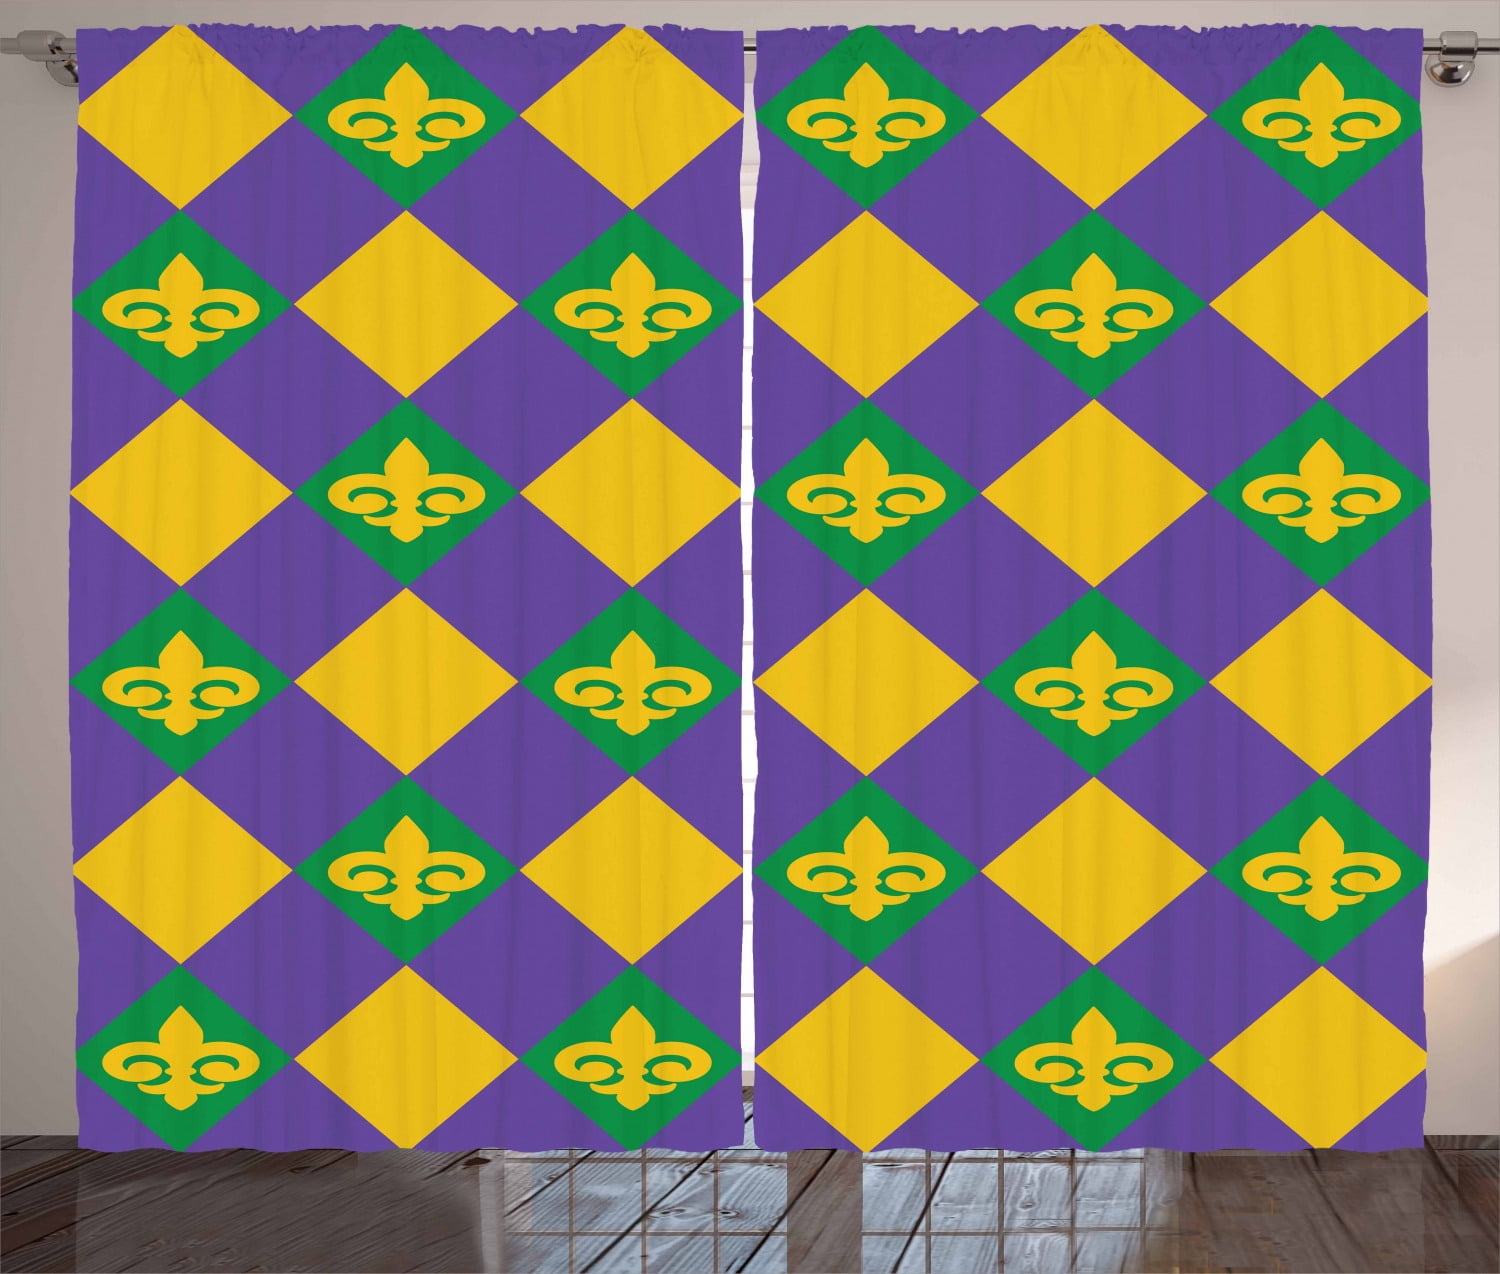 New Orleans Curtains 2 Panels Set Mardi Gras Themed Rhombuses With Fleur De Lis Motifs Classic Geometry Window Drapes For Living Room Bedroom 108w